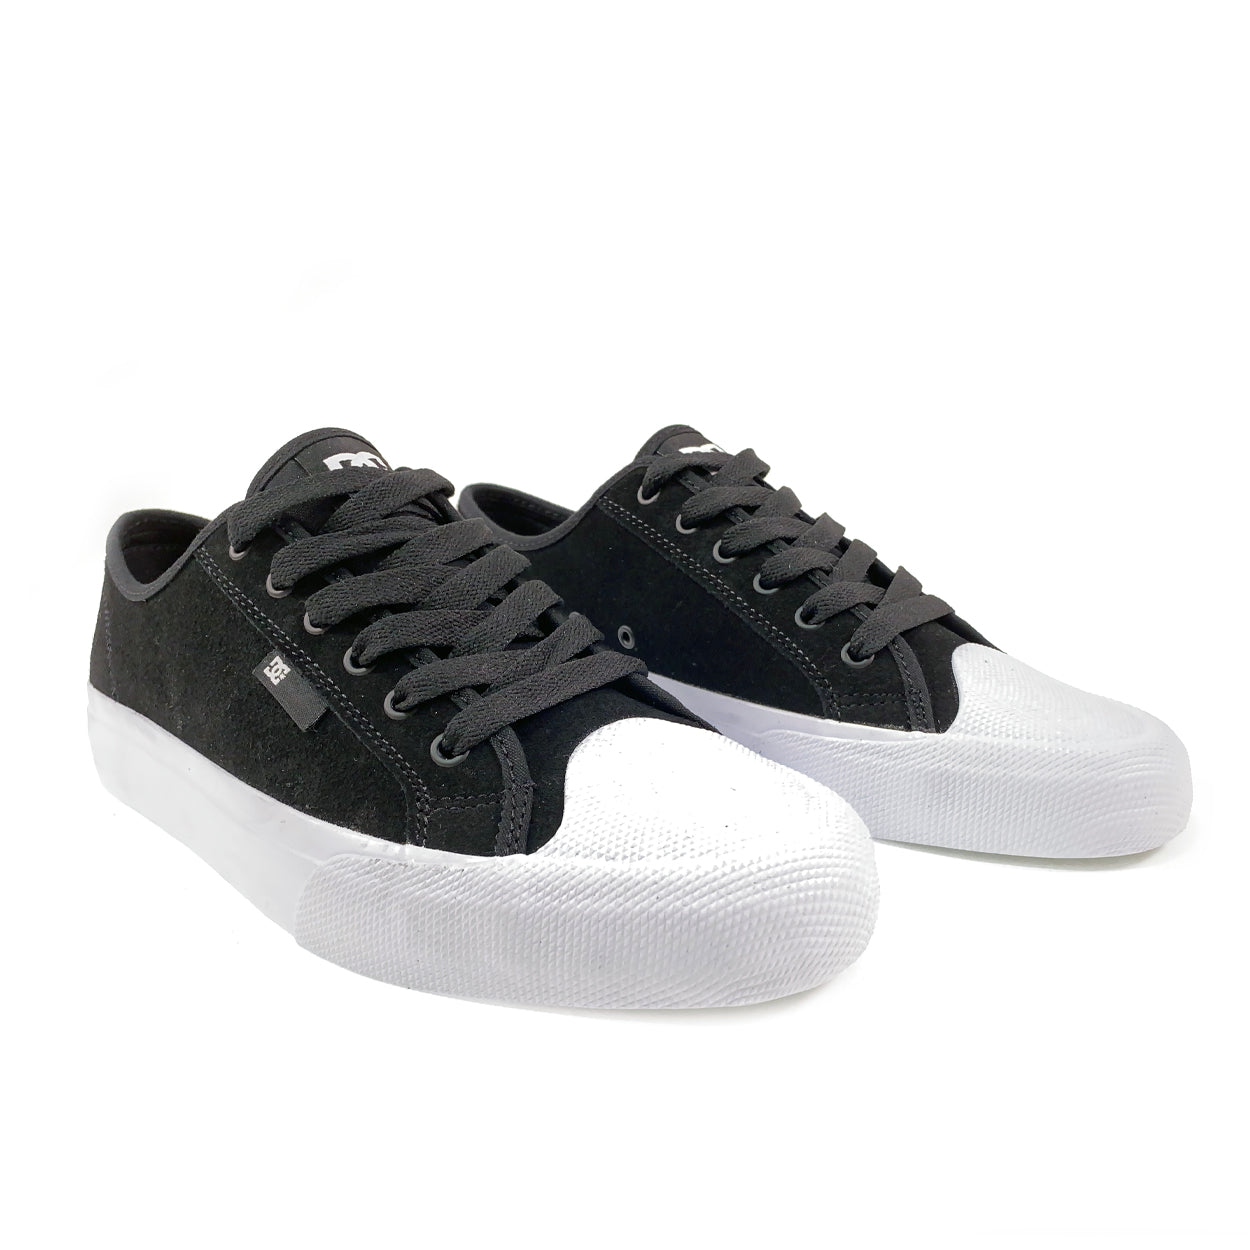 DC Shoes Manual RT S Leather Skate Shoes - Black / White - Prime Delux Store